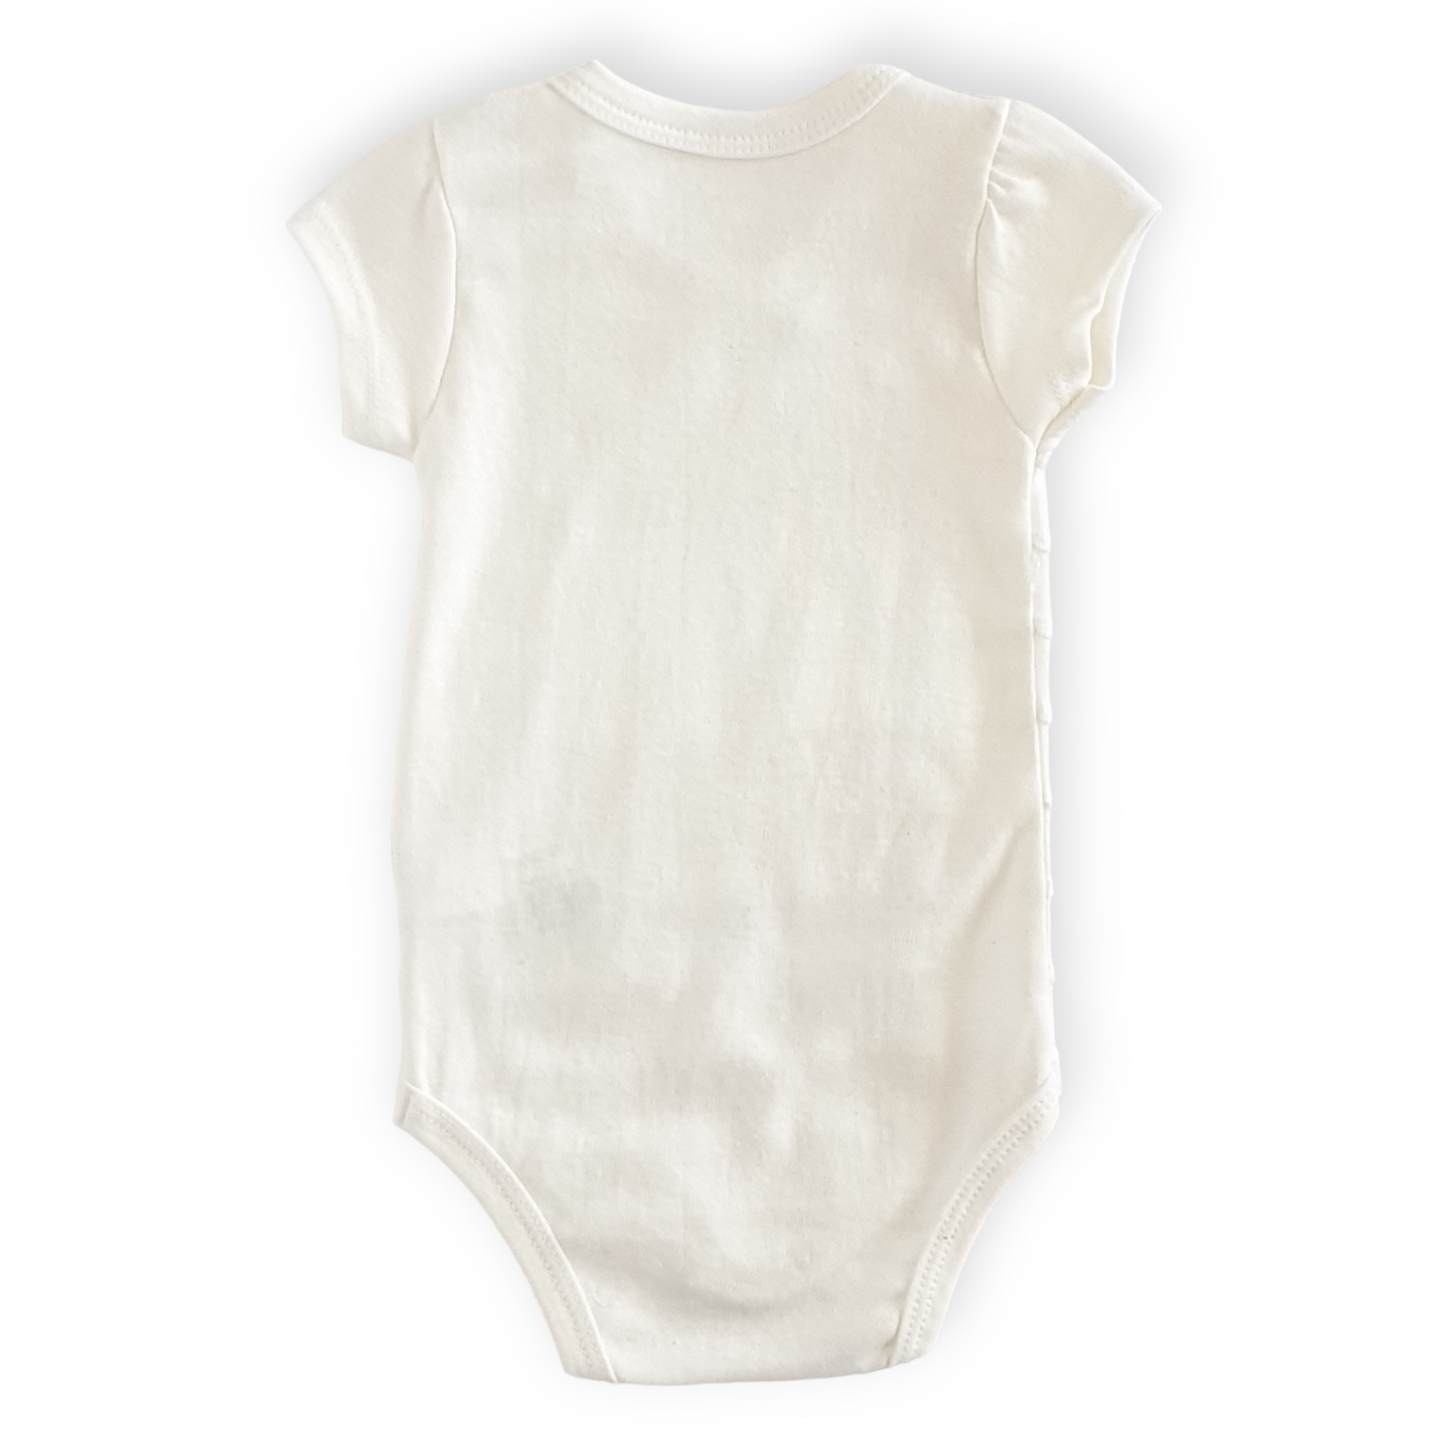 White Body with Emroidery Stripes-Body, Bodysuit, Catgirl, Creeper, Girl, Onesie, Pink, Short Sleeve, SS23-Veo-[Too Twee]-[Tootwee]-[baby]-[newborn]-[clothes]-[essentials]-[toys]-[Lebanon]